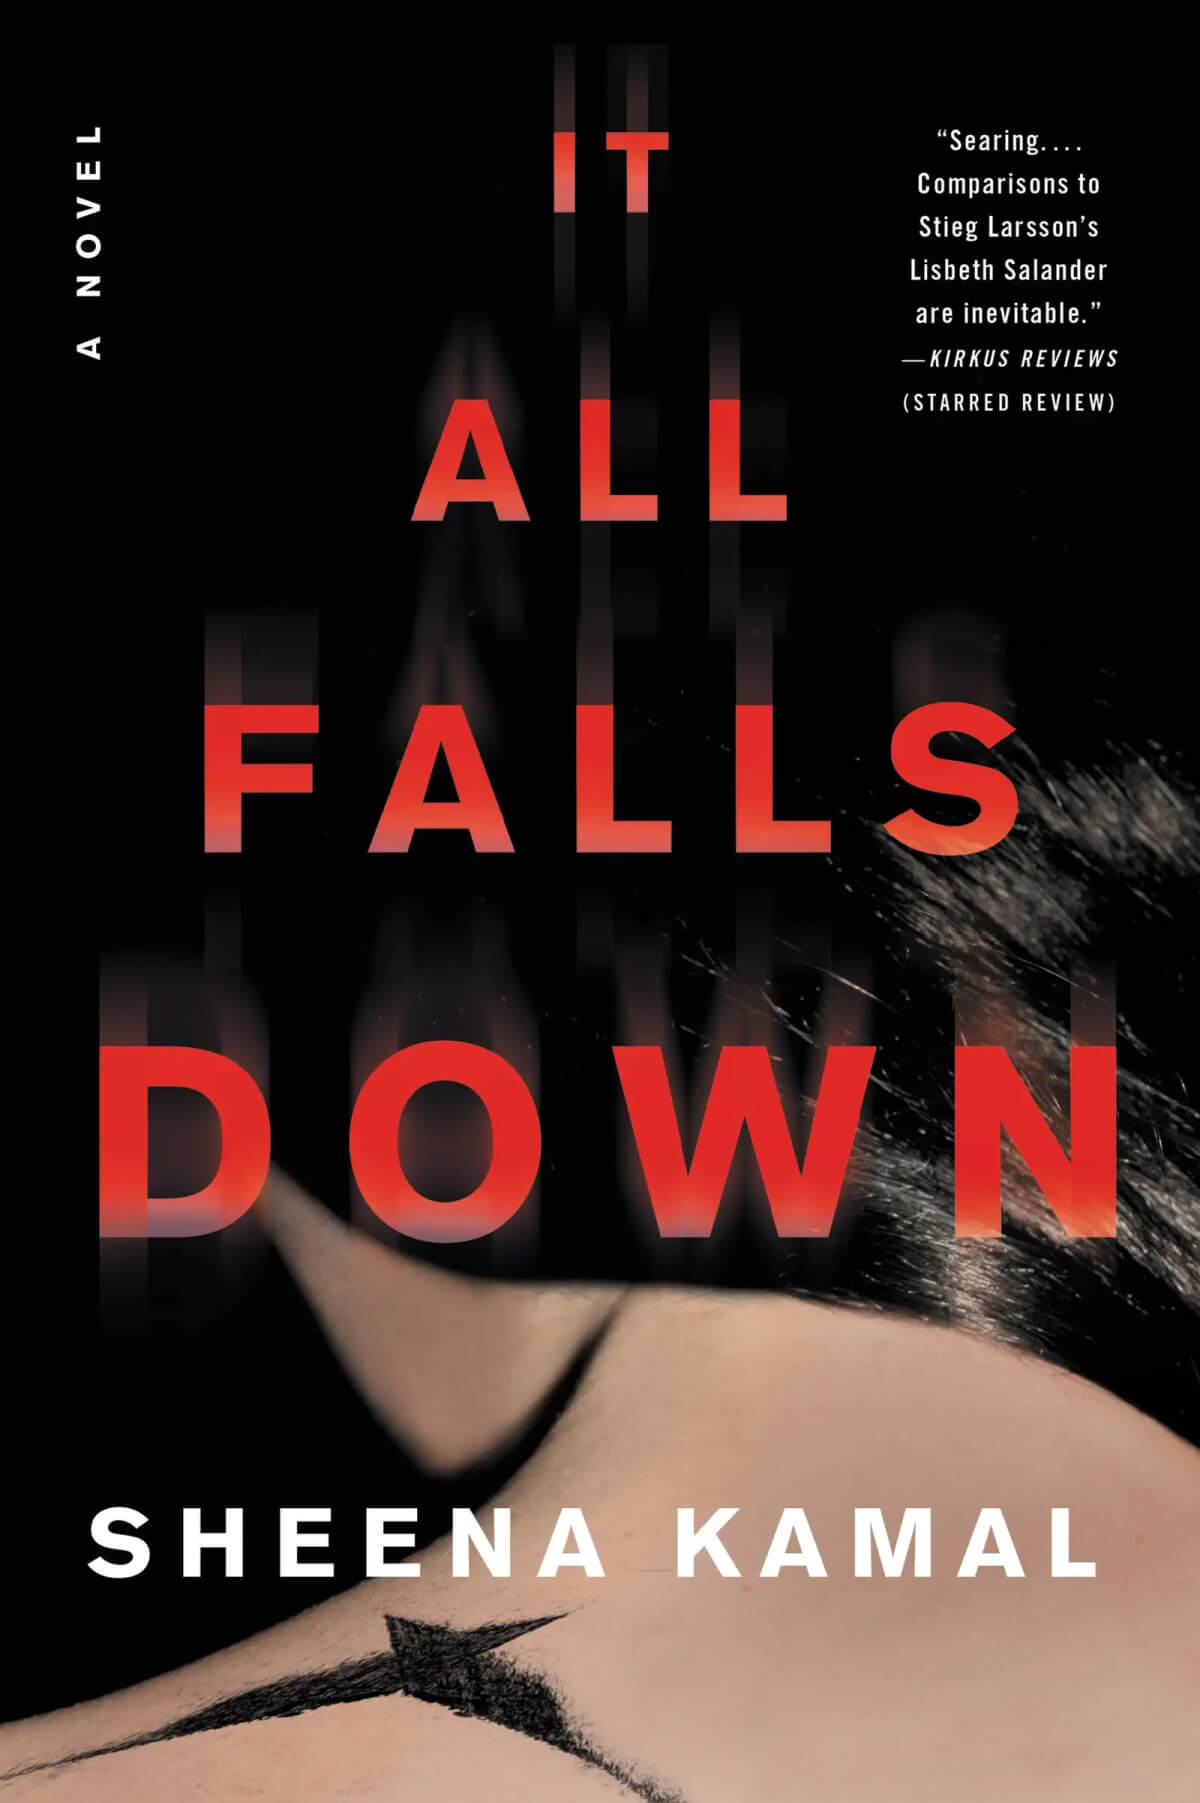 Book Review: It All Falls Down